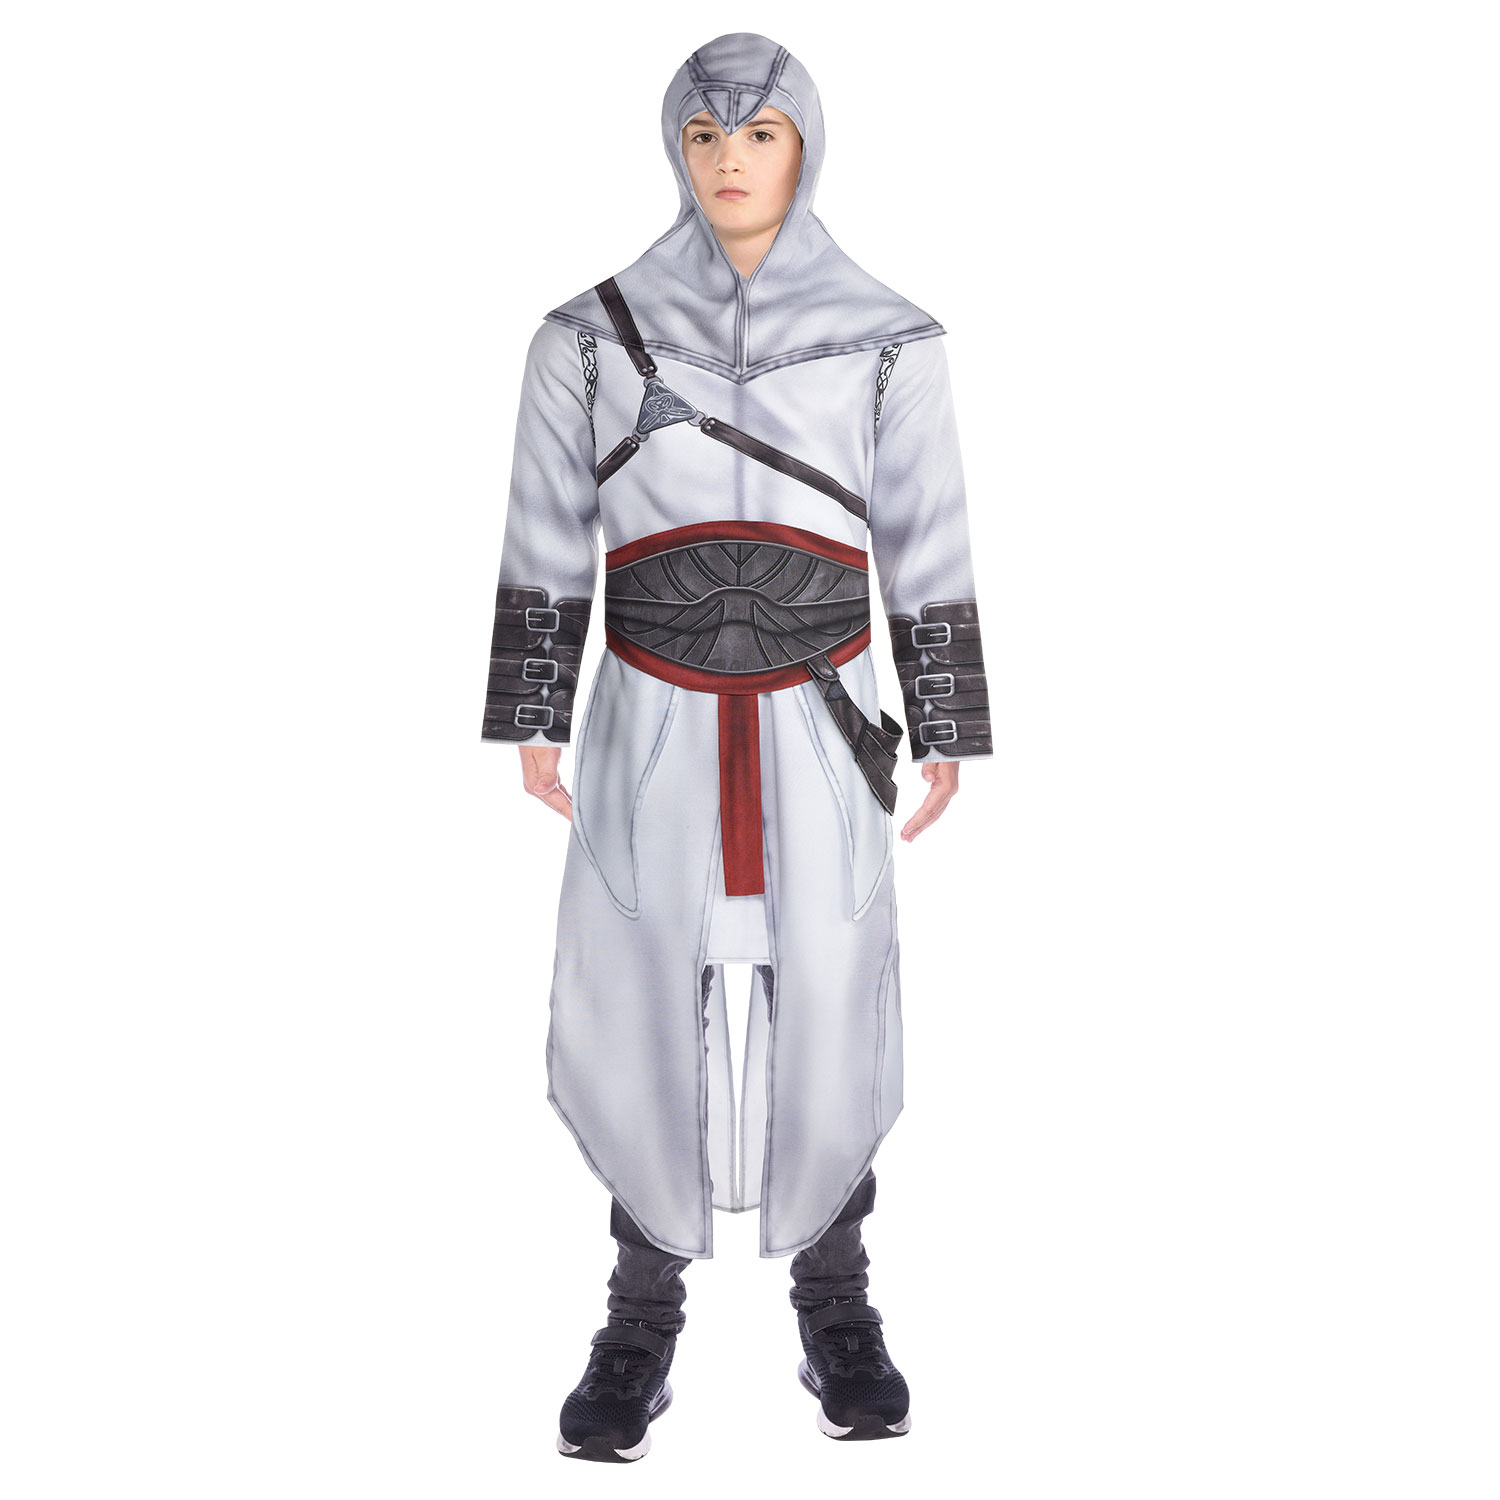 Assassin's Creed Robe - Age 8-10 Years - 1 PC : Amscan International